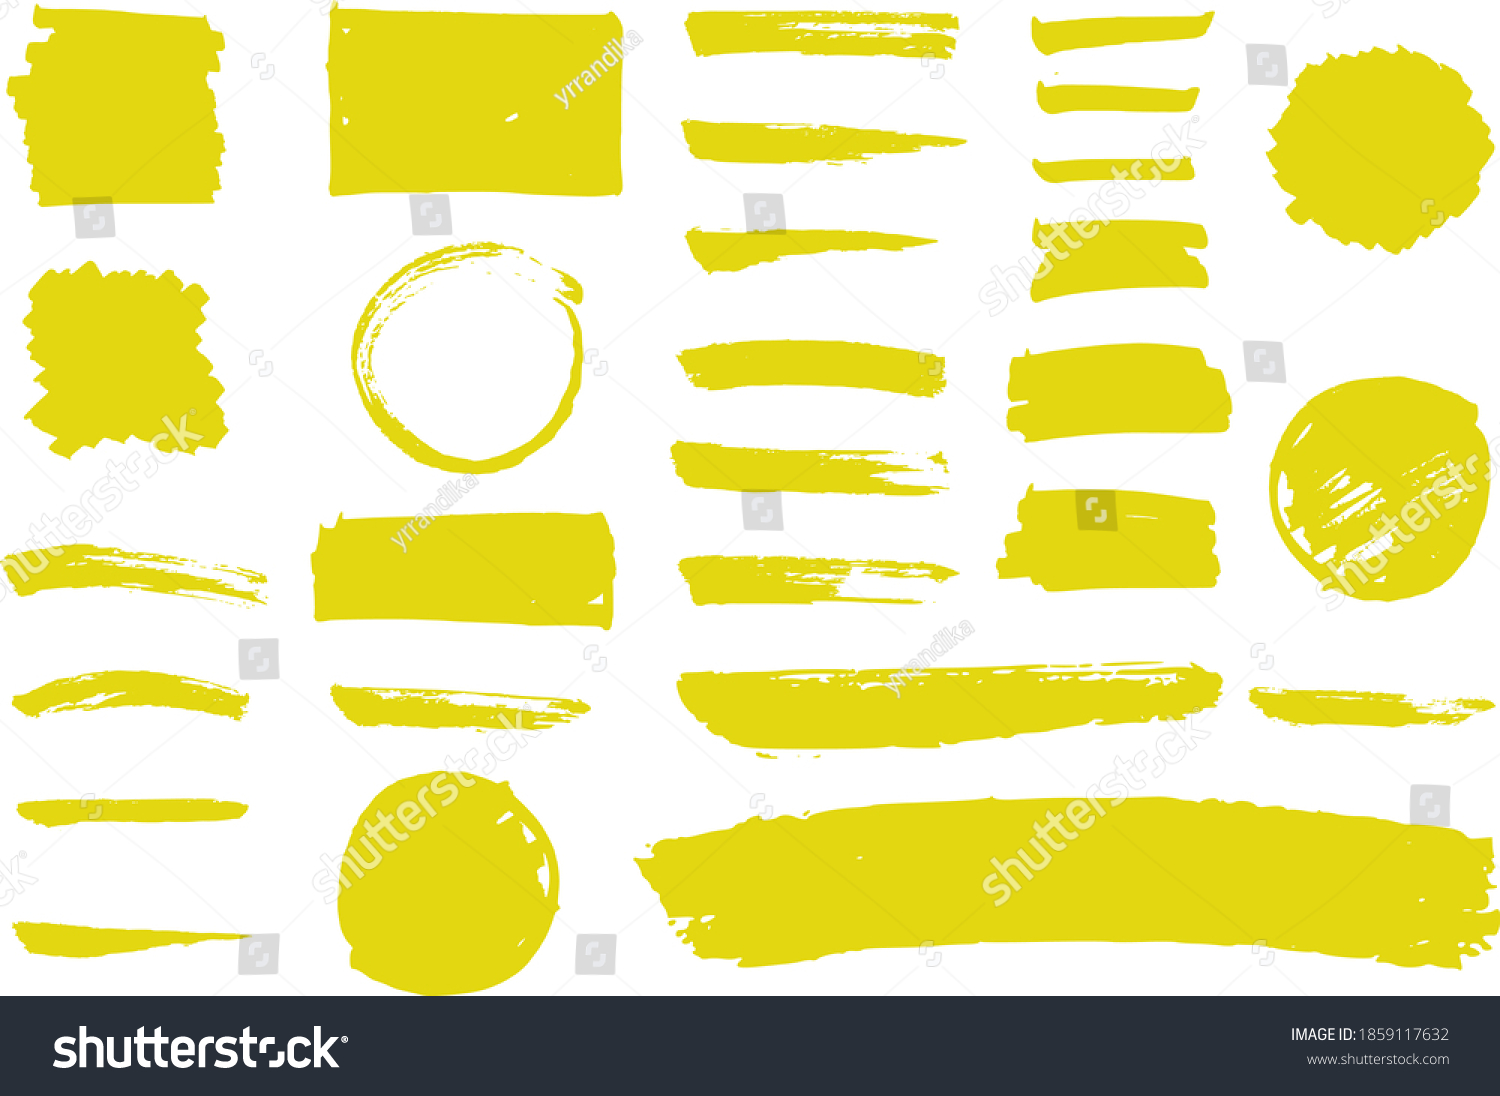 Red Watercolor Brush Stroke Collection Stock Illustration Shutterstock